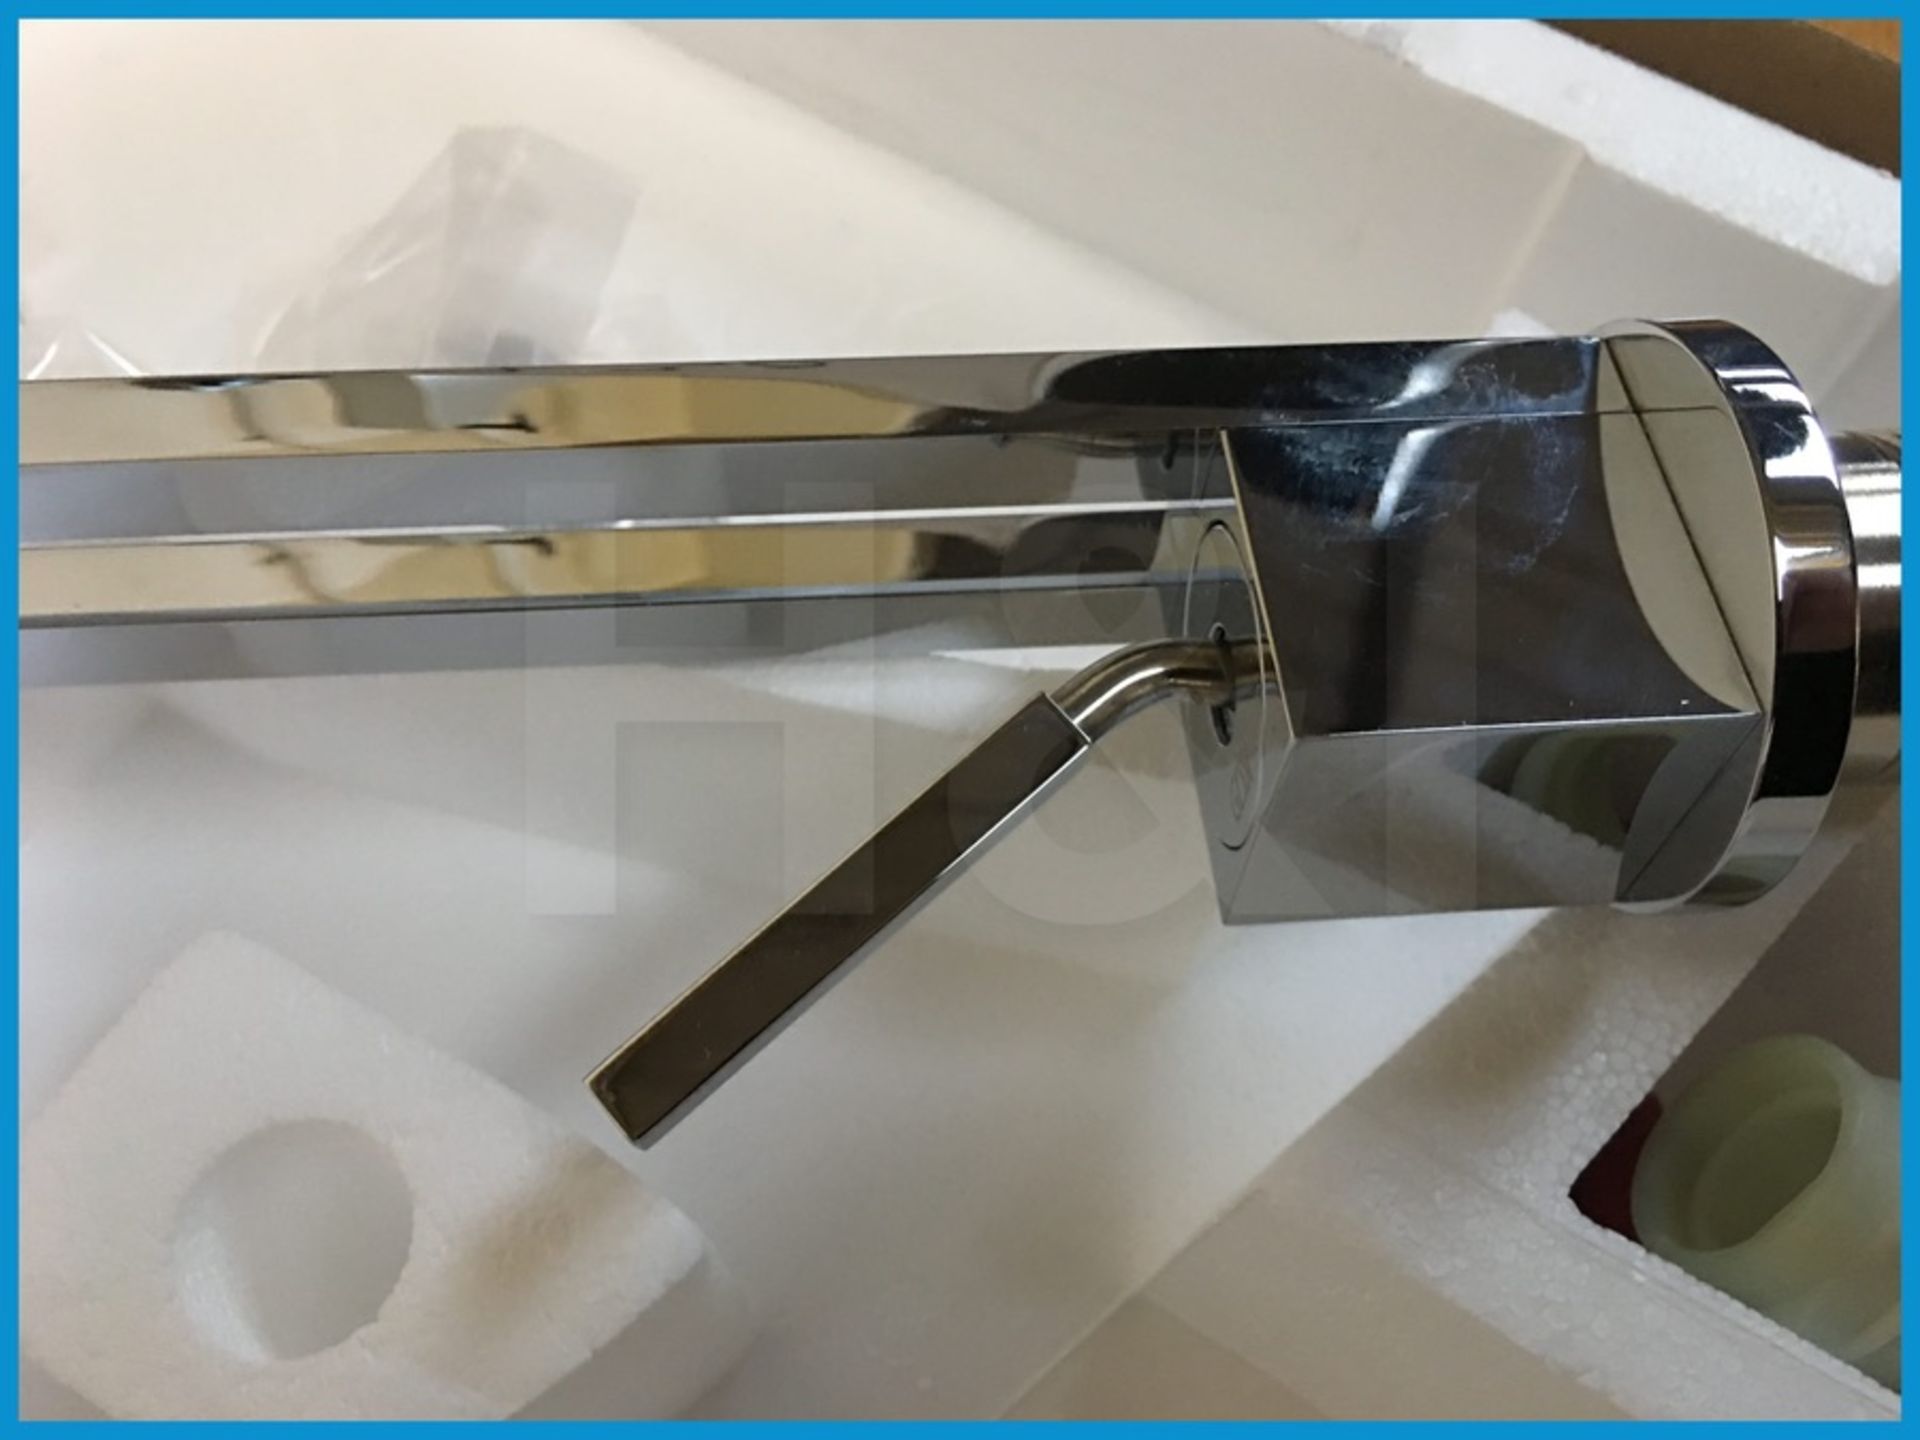 Stunning designer Gessi Duplice monobloc basin mixer in polished chrome finish. New and boxed. - Image 5 of 8